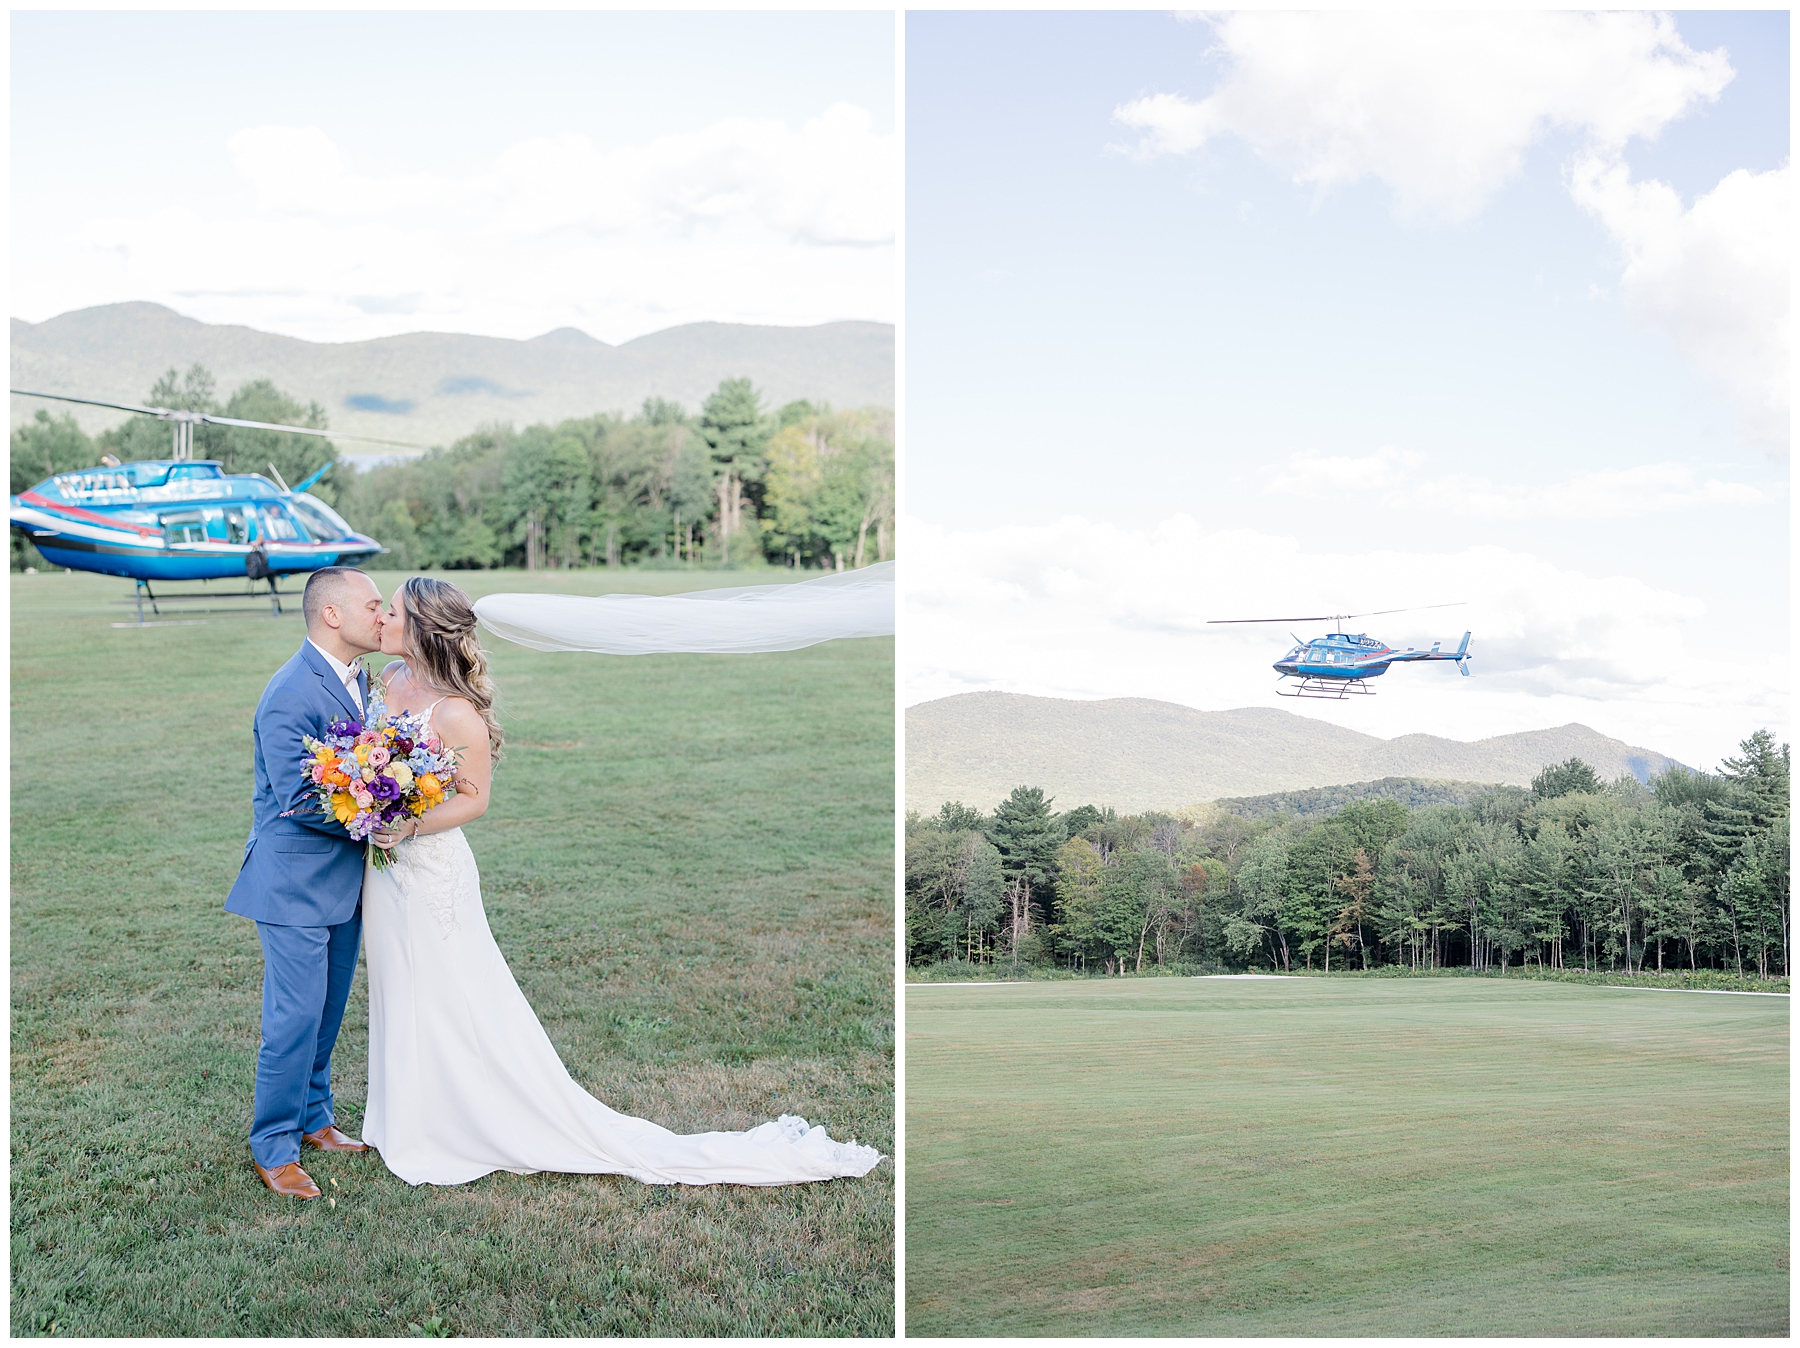 newlyweds kiss in front of helicopter 